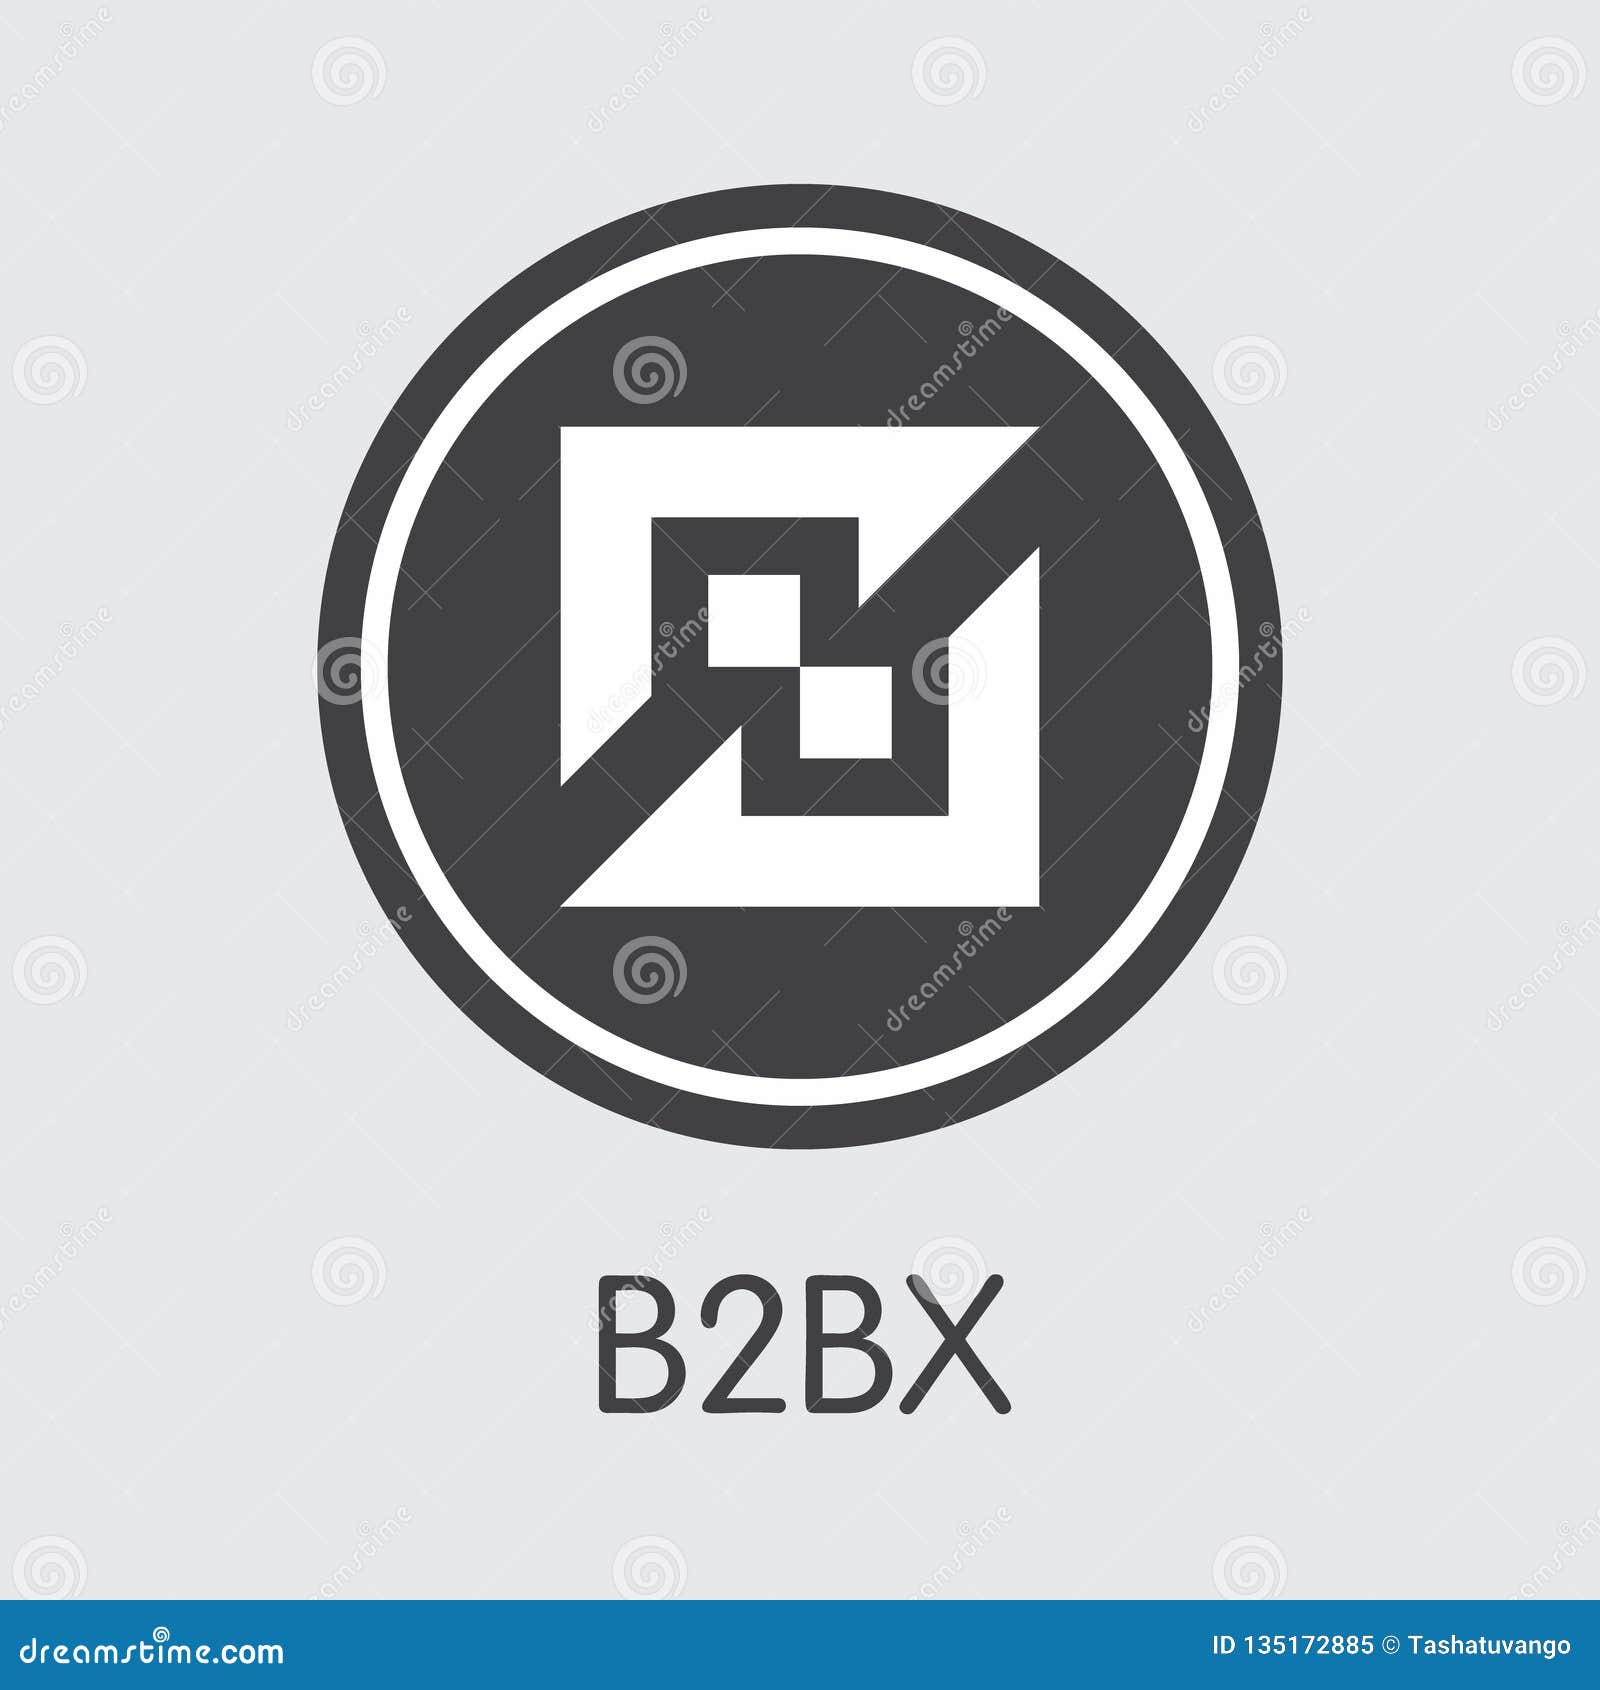 Exchange - B2bx. The Crypto Coins Or Cryptocurrency Logo ...